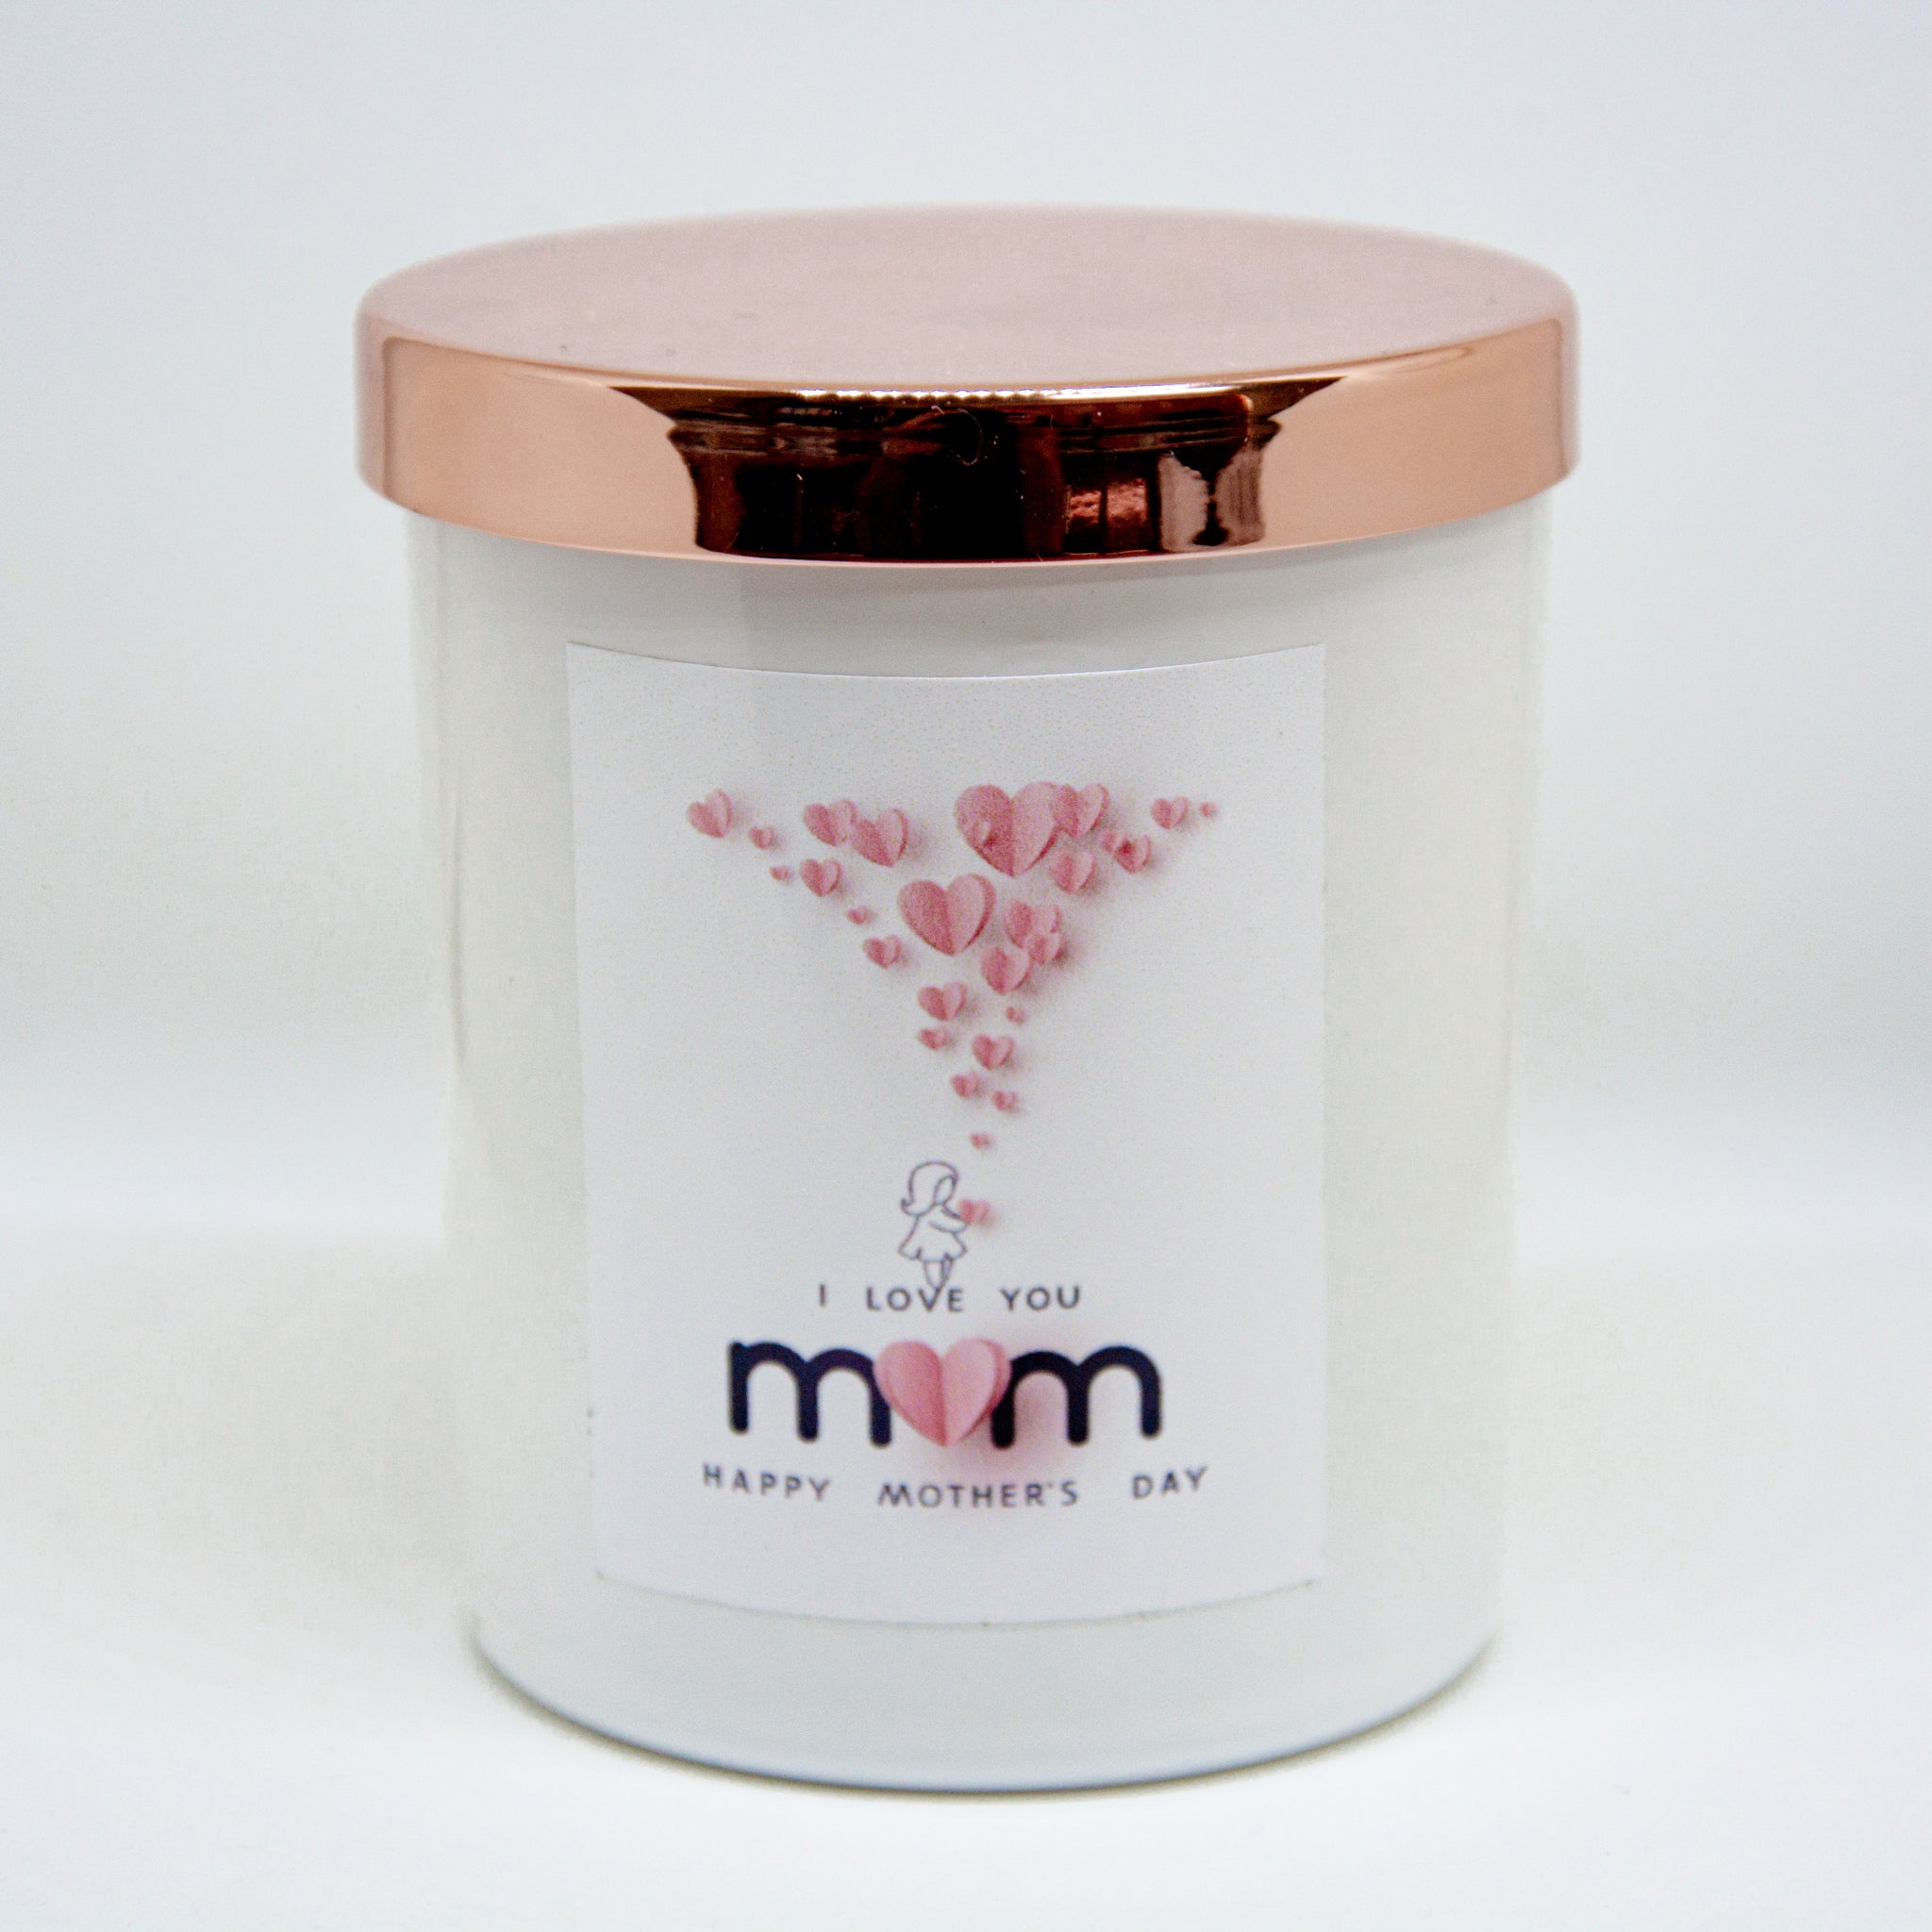 Mothers day gift, mother's day, mothers day candle